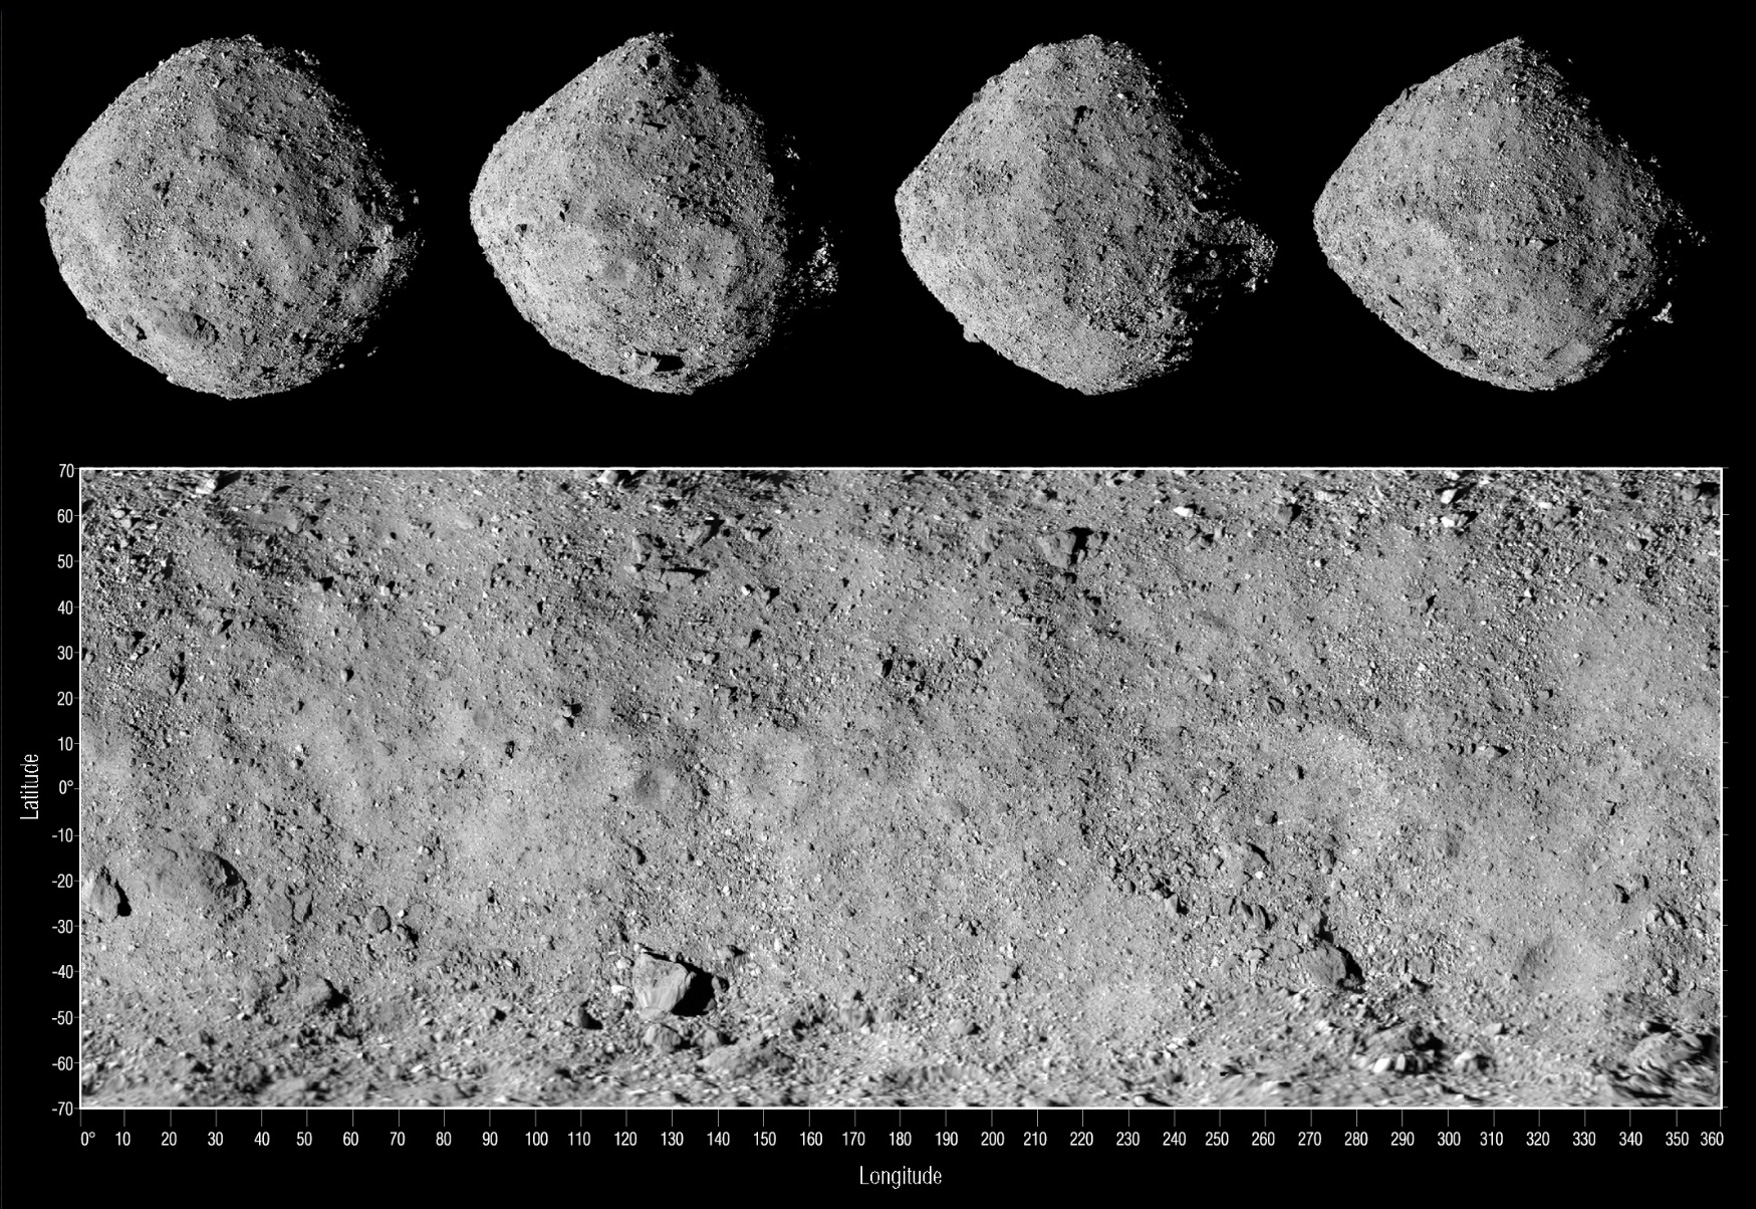 Multiple views showing the boulder-covered surface of asteroid Bennu.